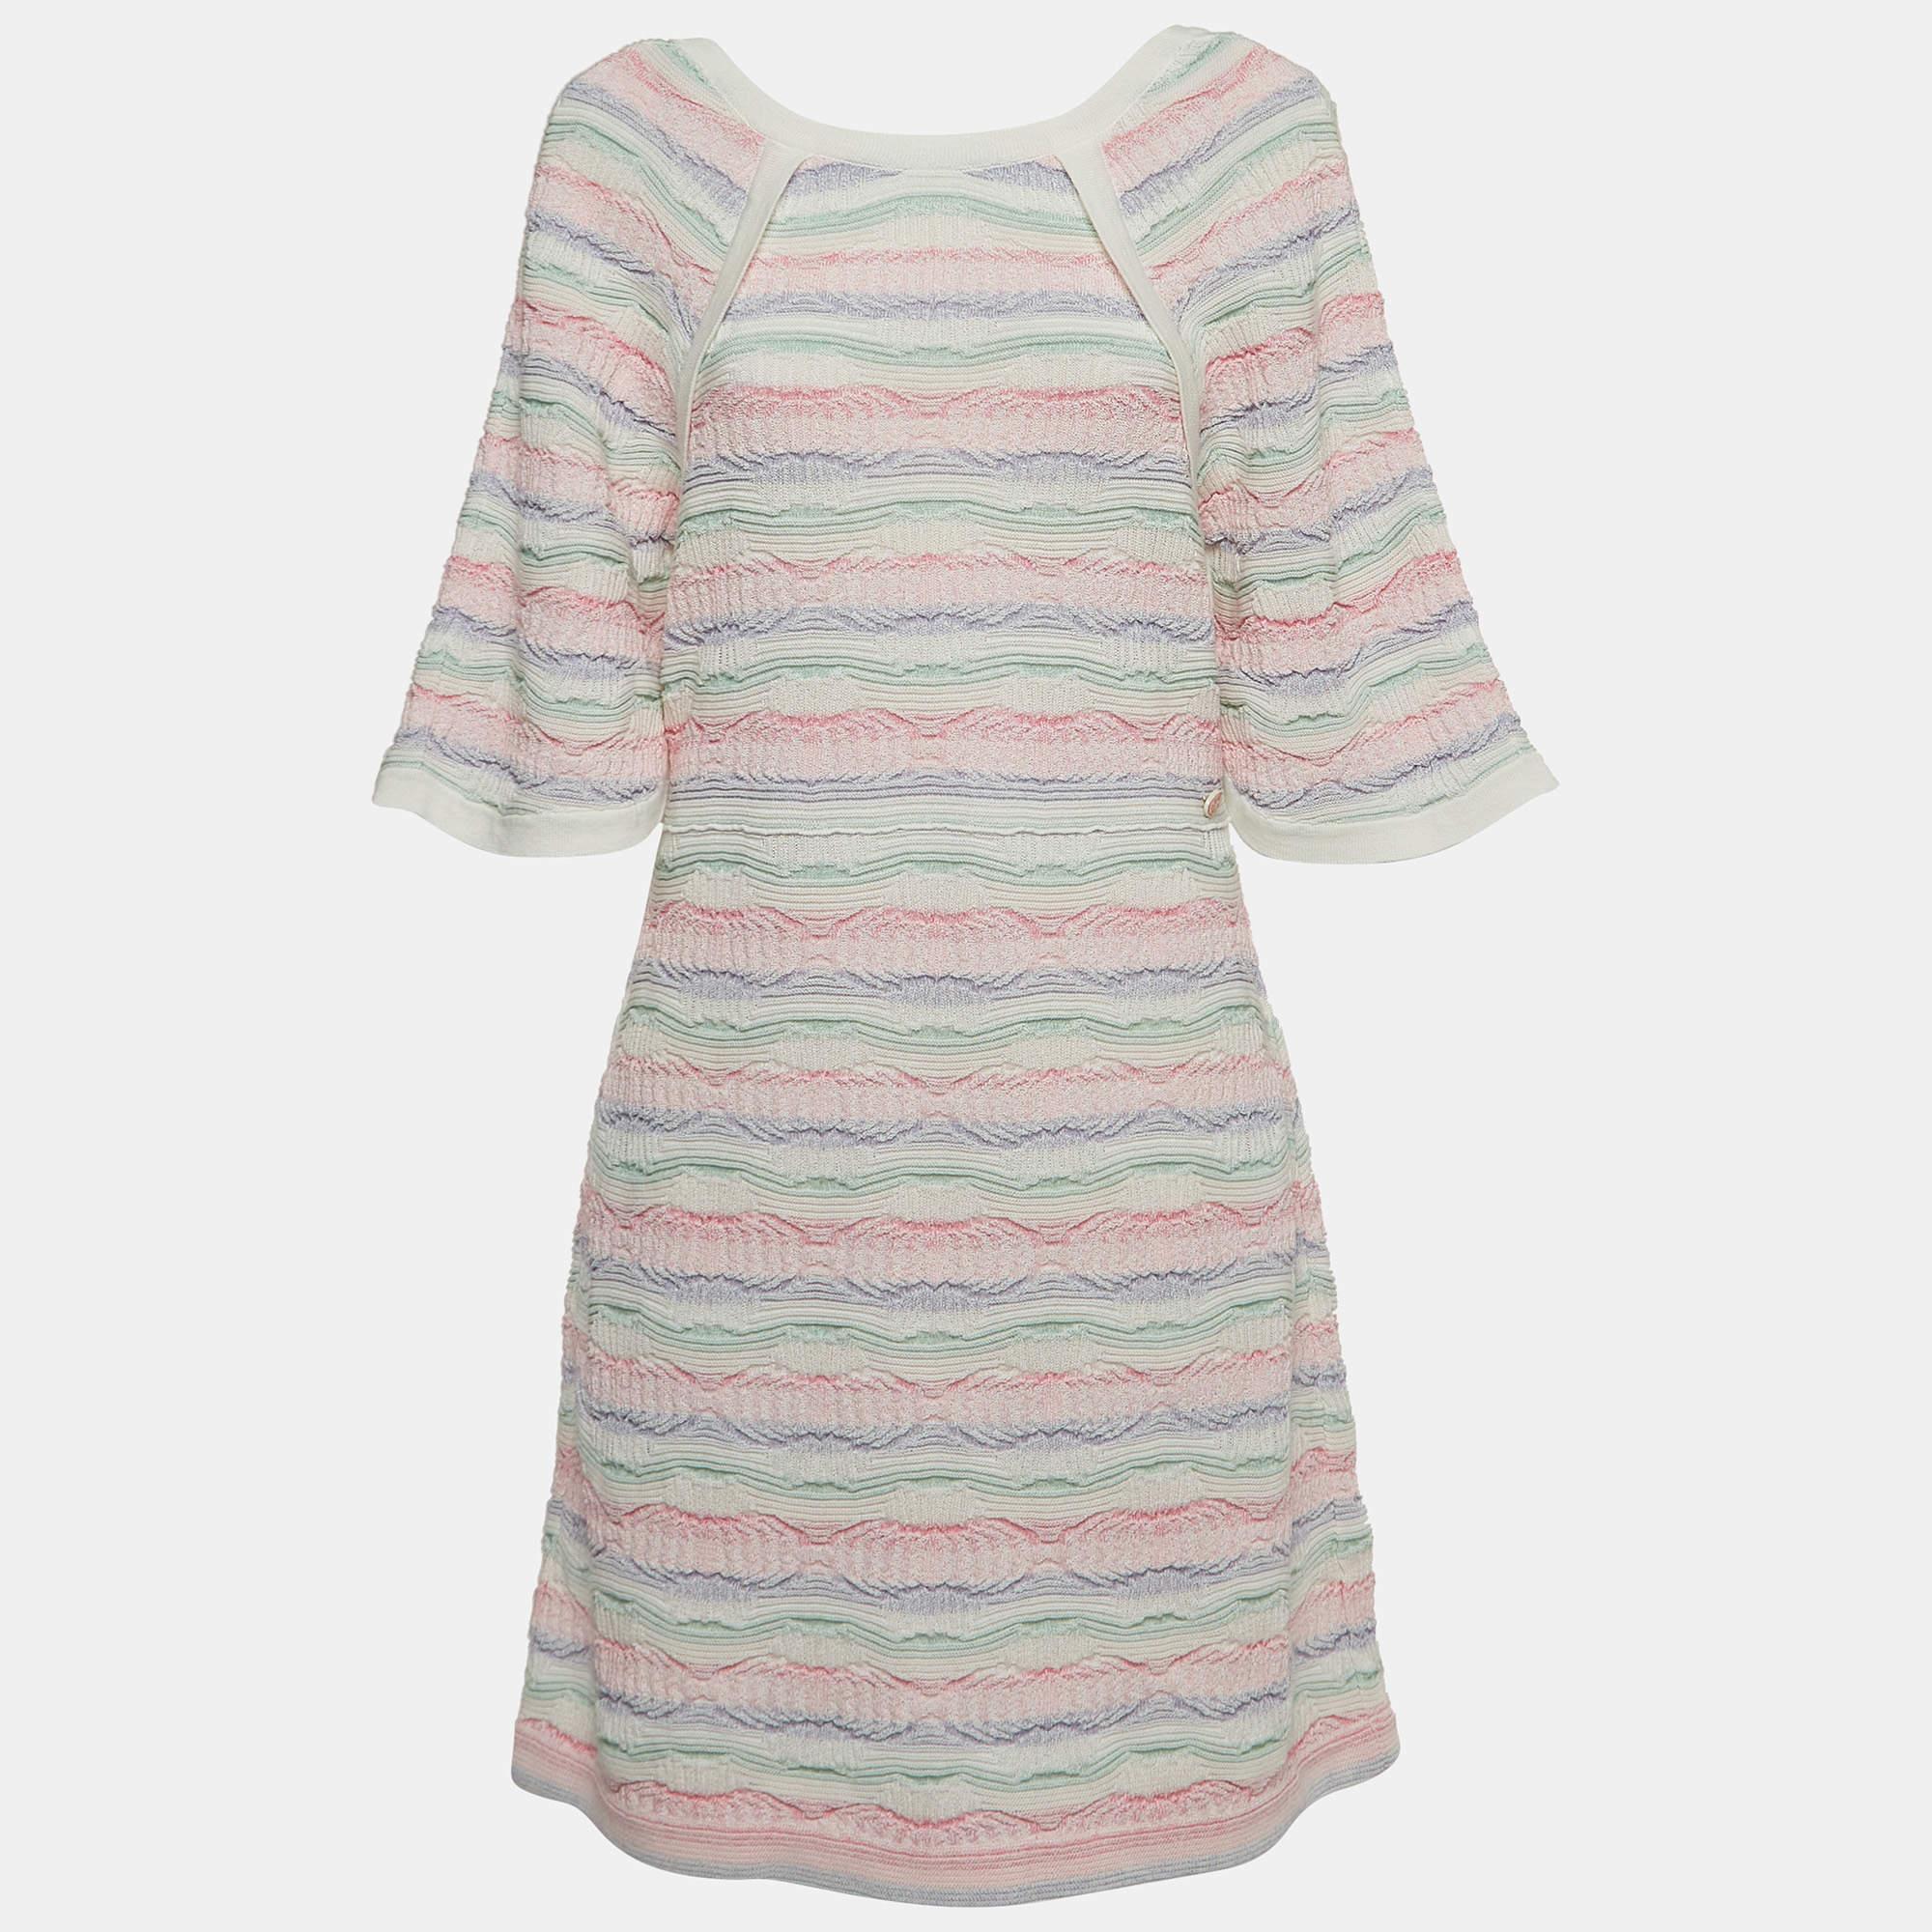 The Chanel dress is a luxurious piece featuring a harmonious blend of vibrant hues. Crafted from premium knit fabric, it boasts a flattering midi length and showcases Chanel's iconic elegance through a tasteful arrangement of multicolored stripes,